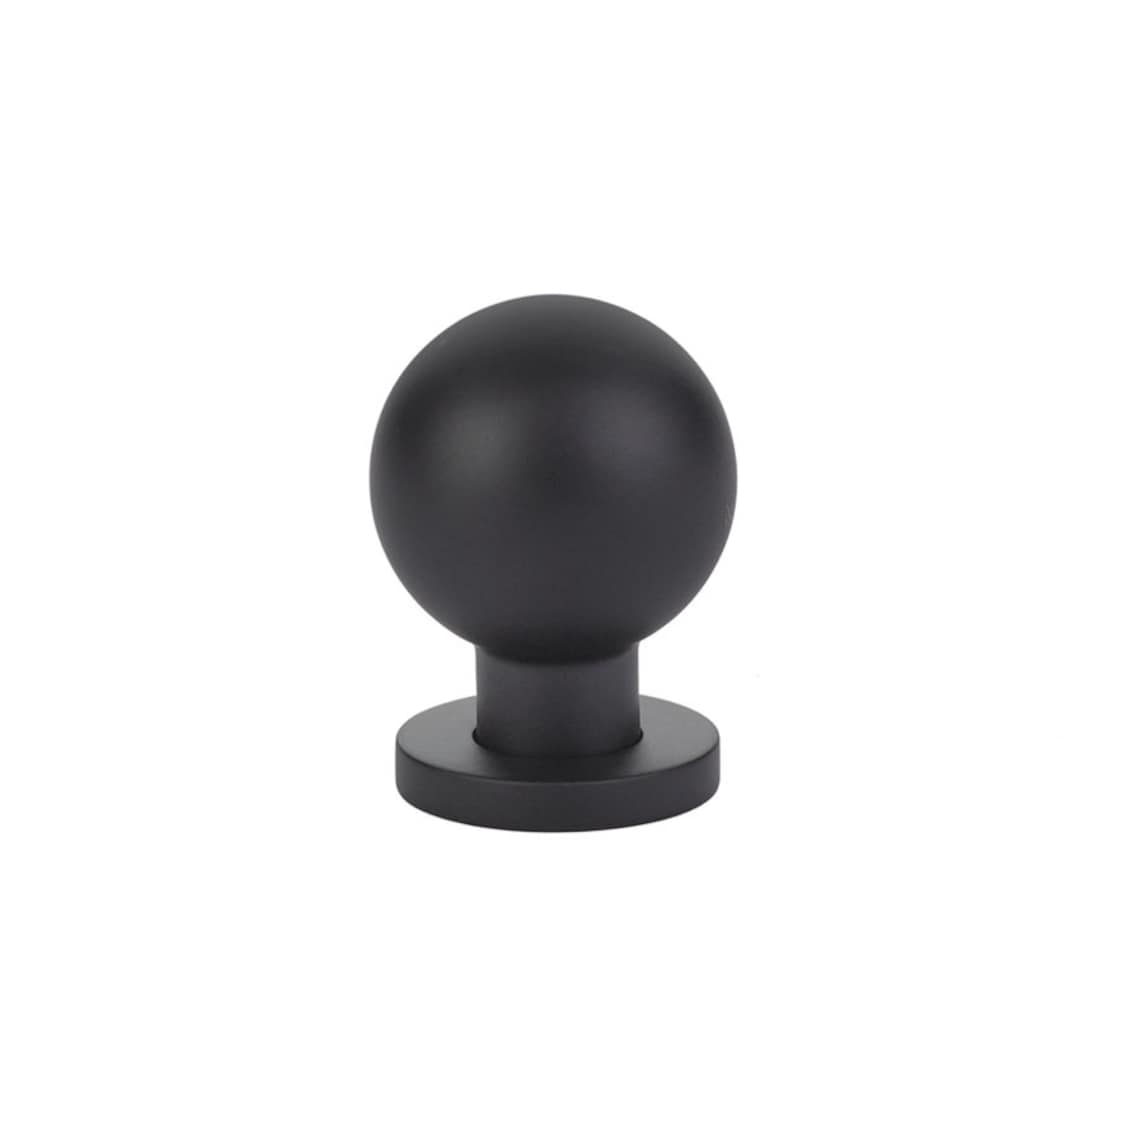 Omni Cabinet Knobs and Drawer Pulls in Matte Black - Industry Hardware